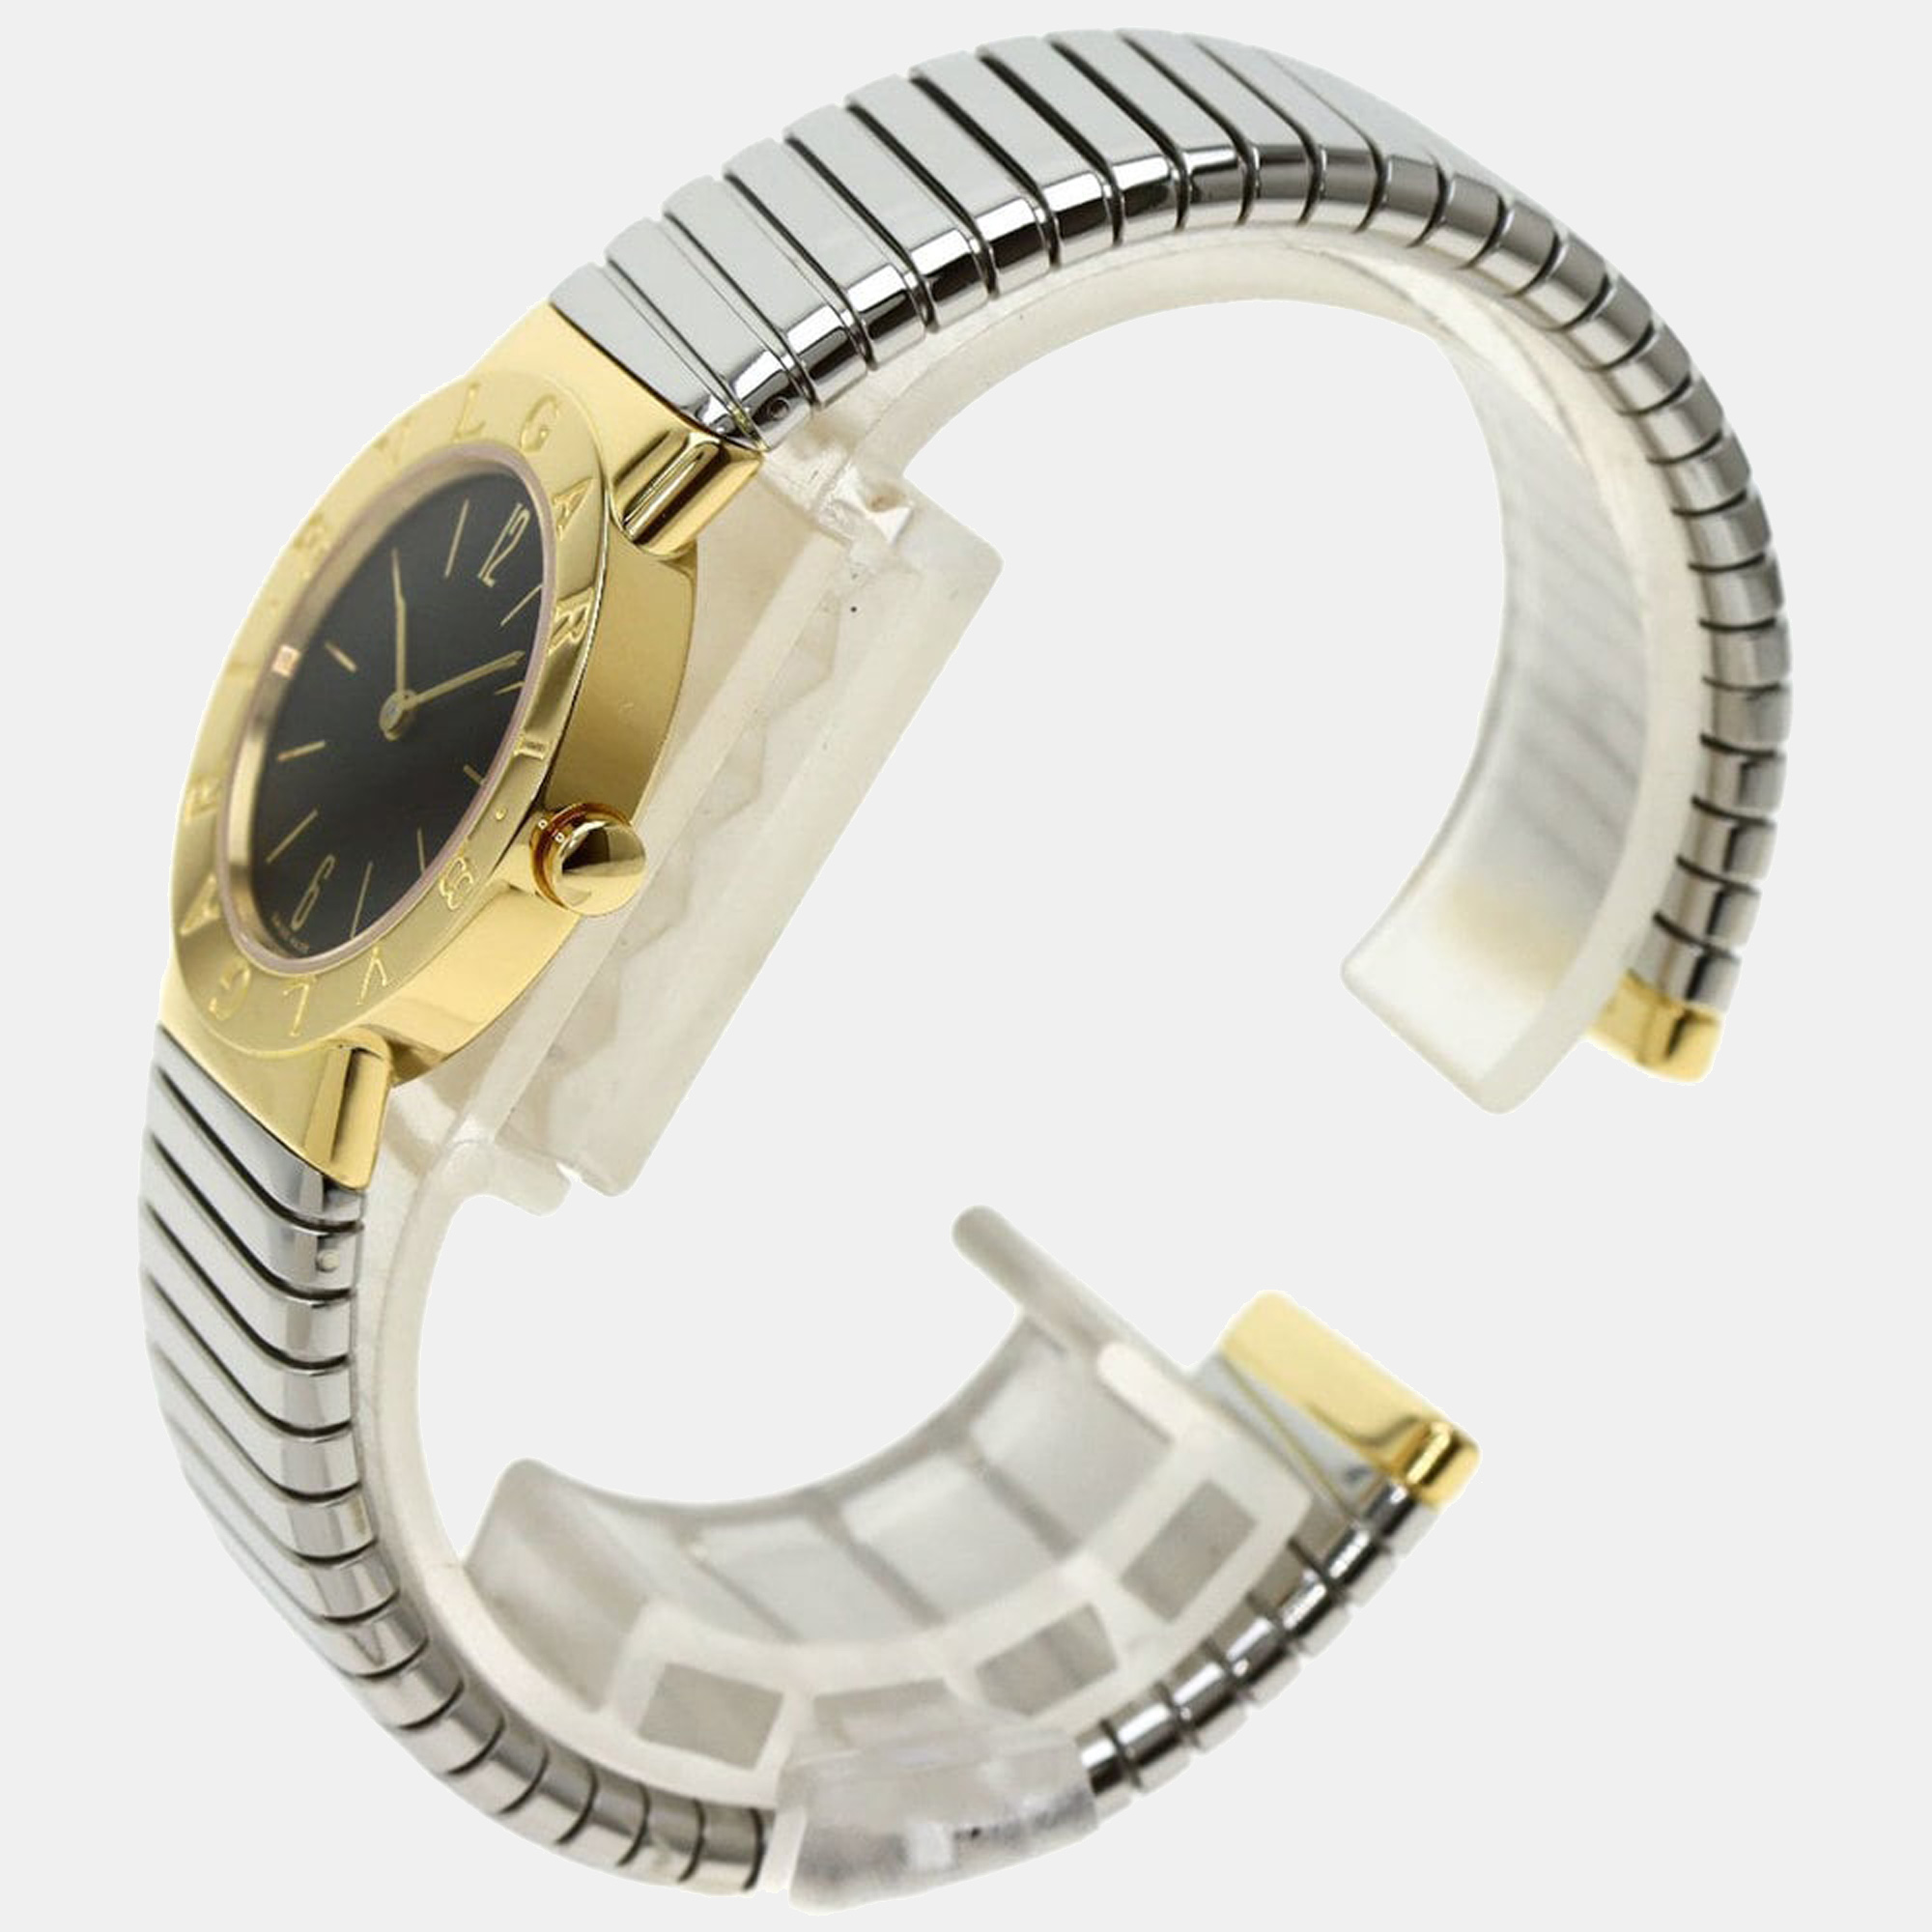 Bvlgari Black 18K Yellow Gold And Stainless Steel Tubogas BB262T Women's Wristwatch 26 Mm